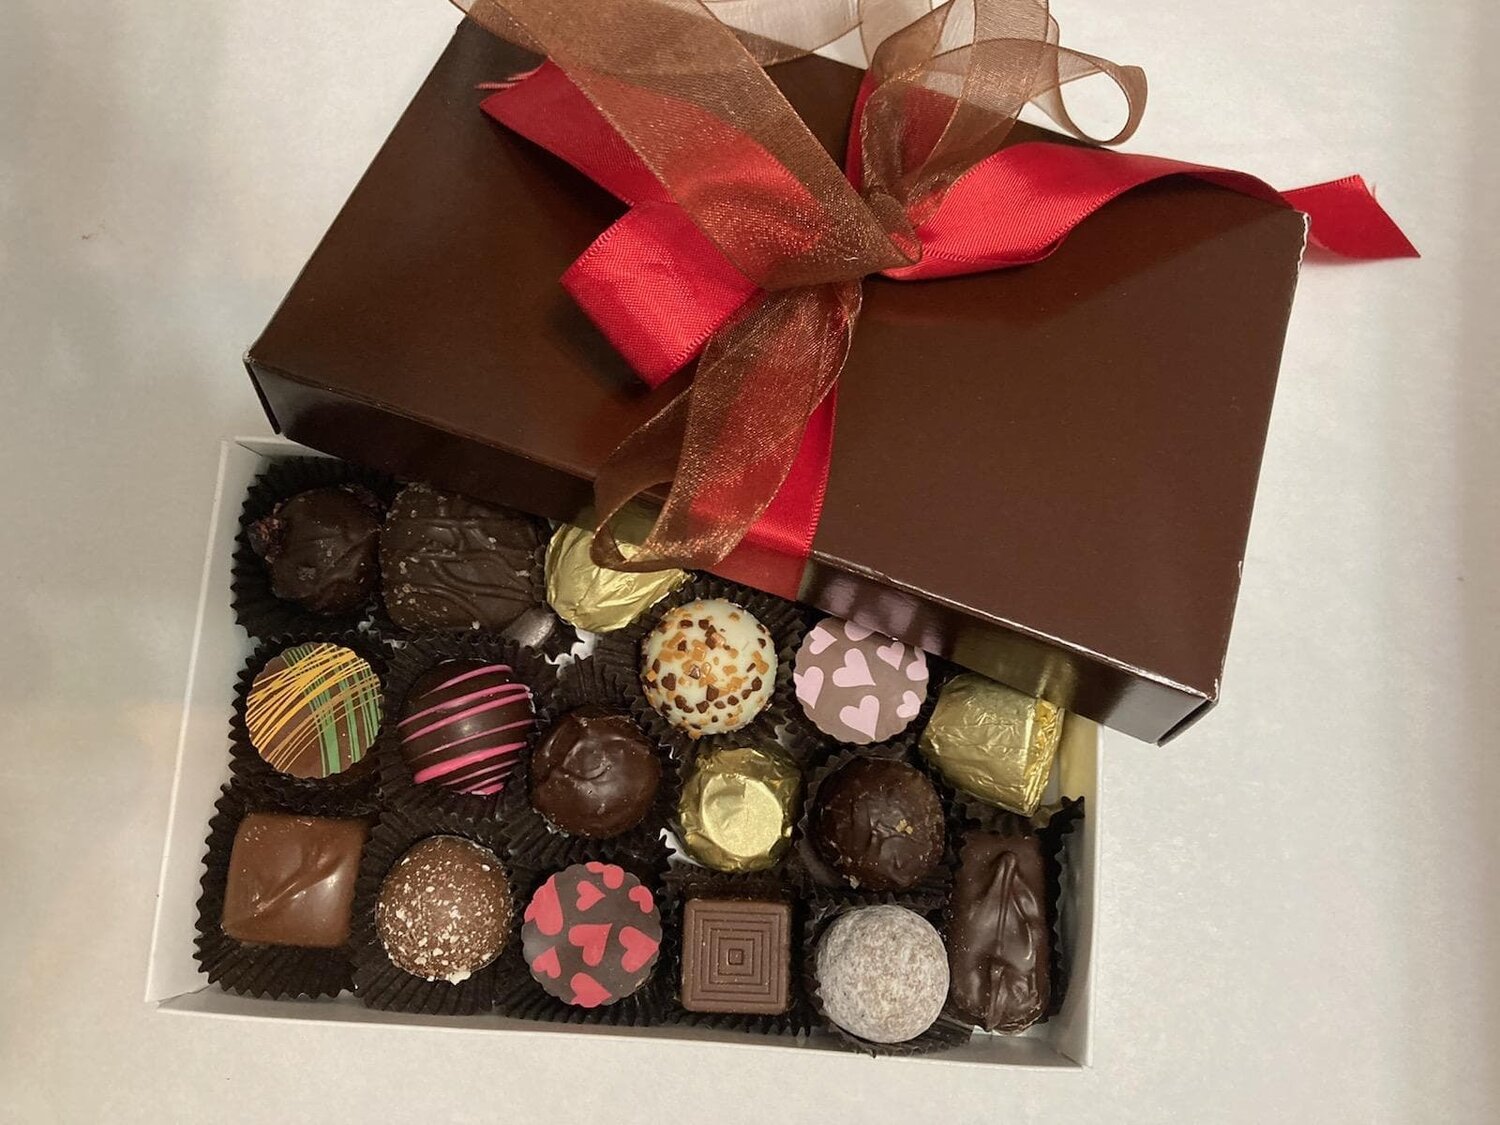 Custom Printed Truffle Boxes, Favor Boxes, Truffle Boxes